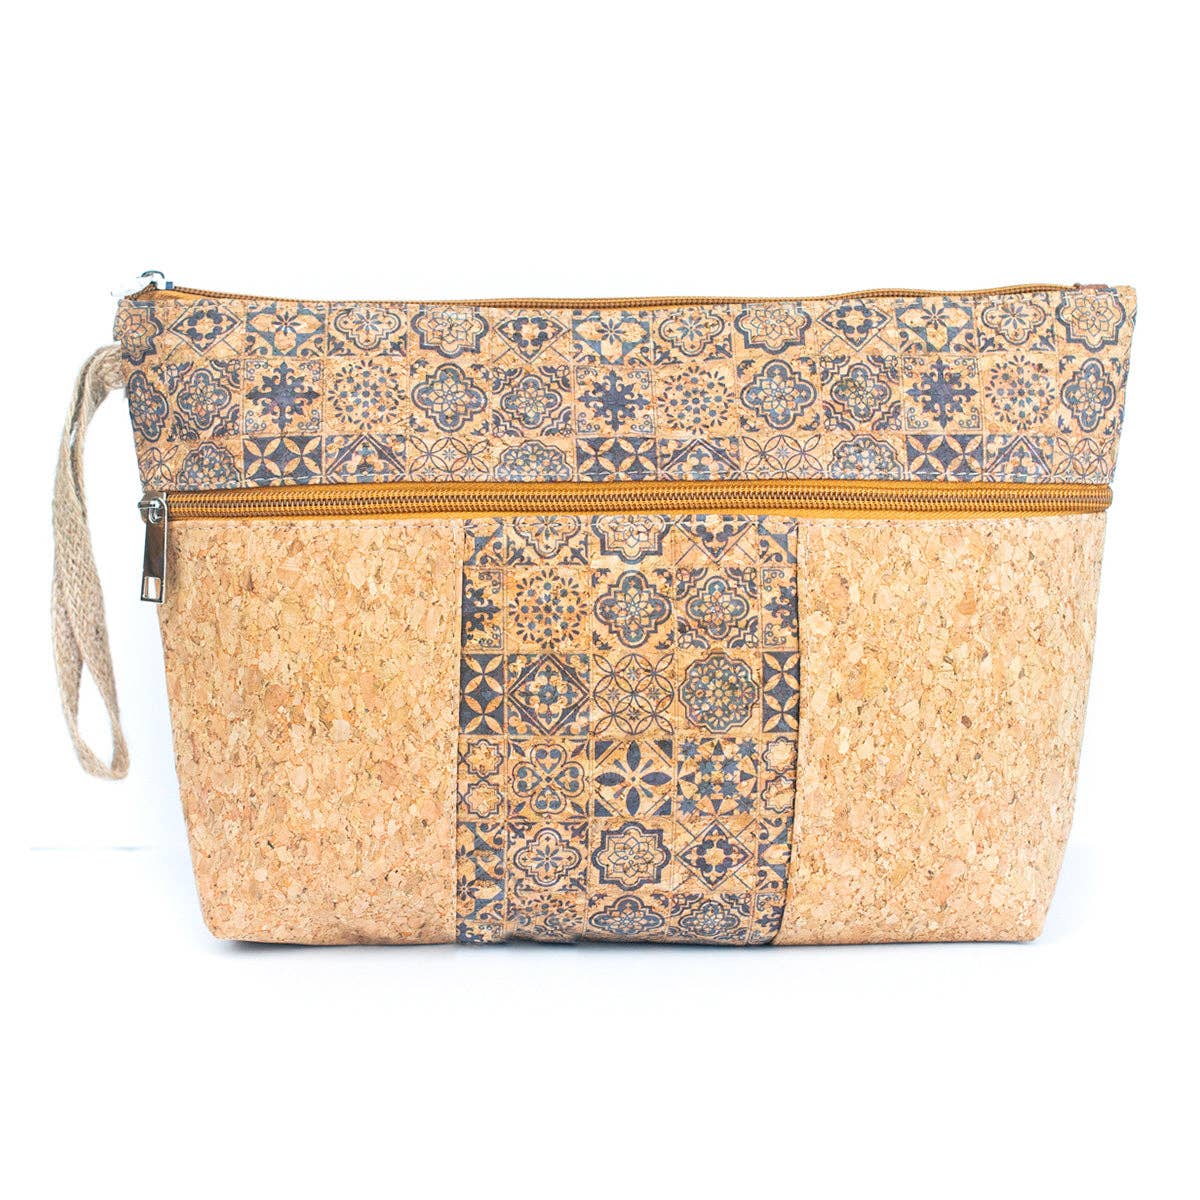 Colorful Mosaic Patterned Cork Clutch w/ Rope Handle | THE CORK COLLECTION